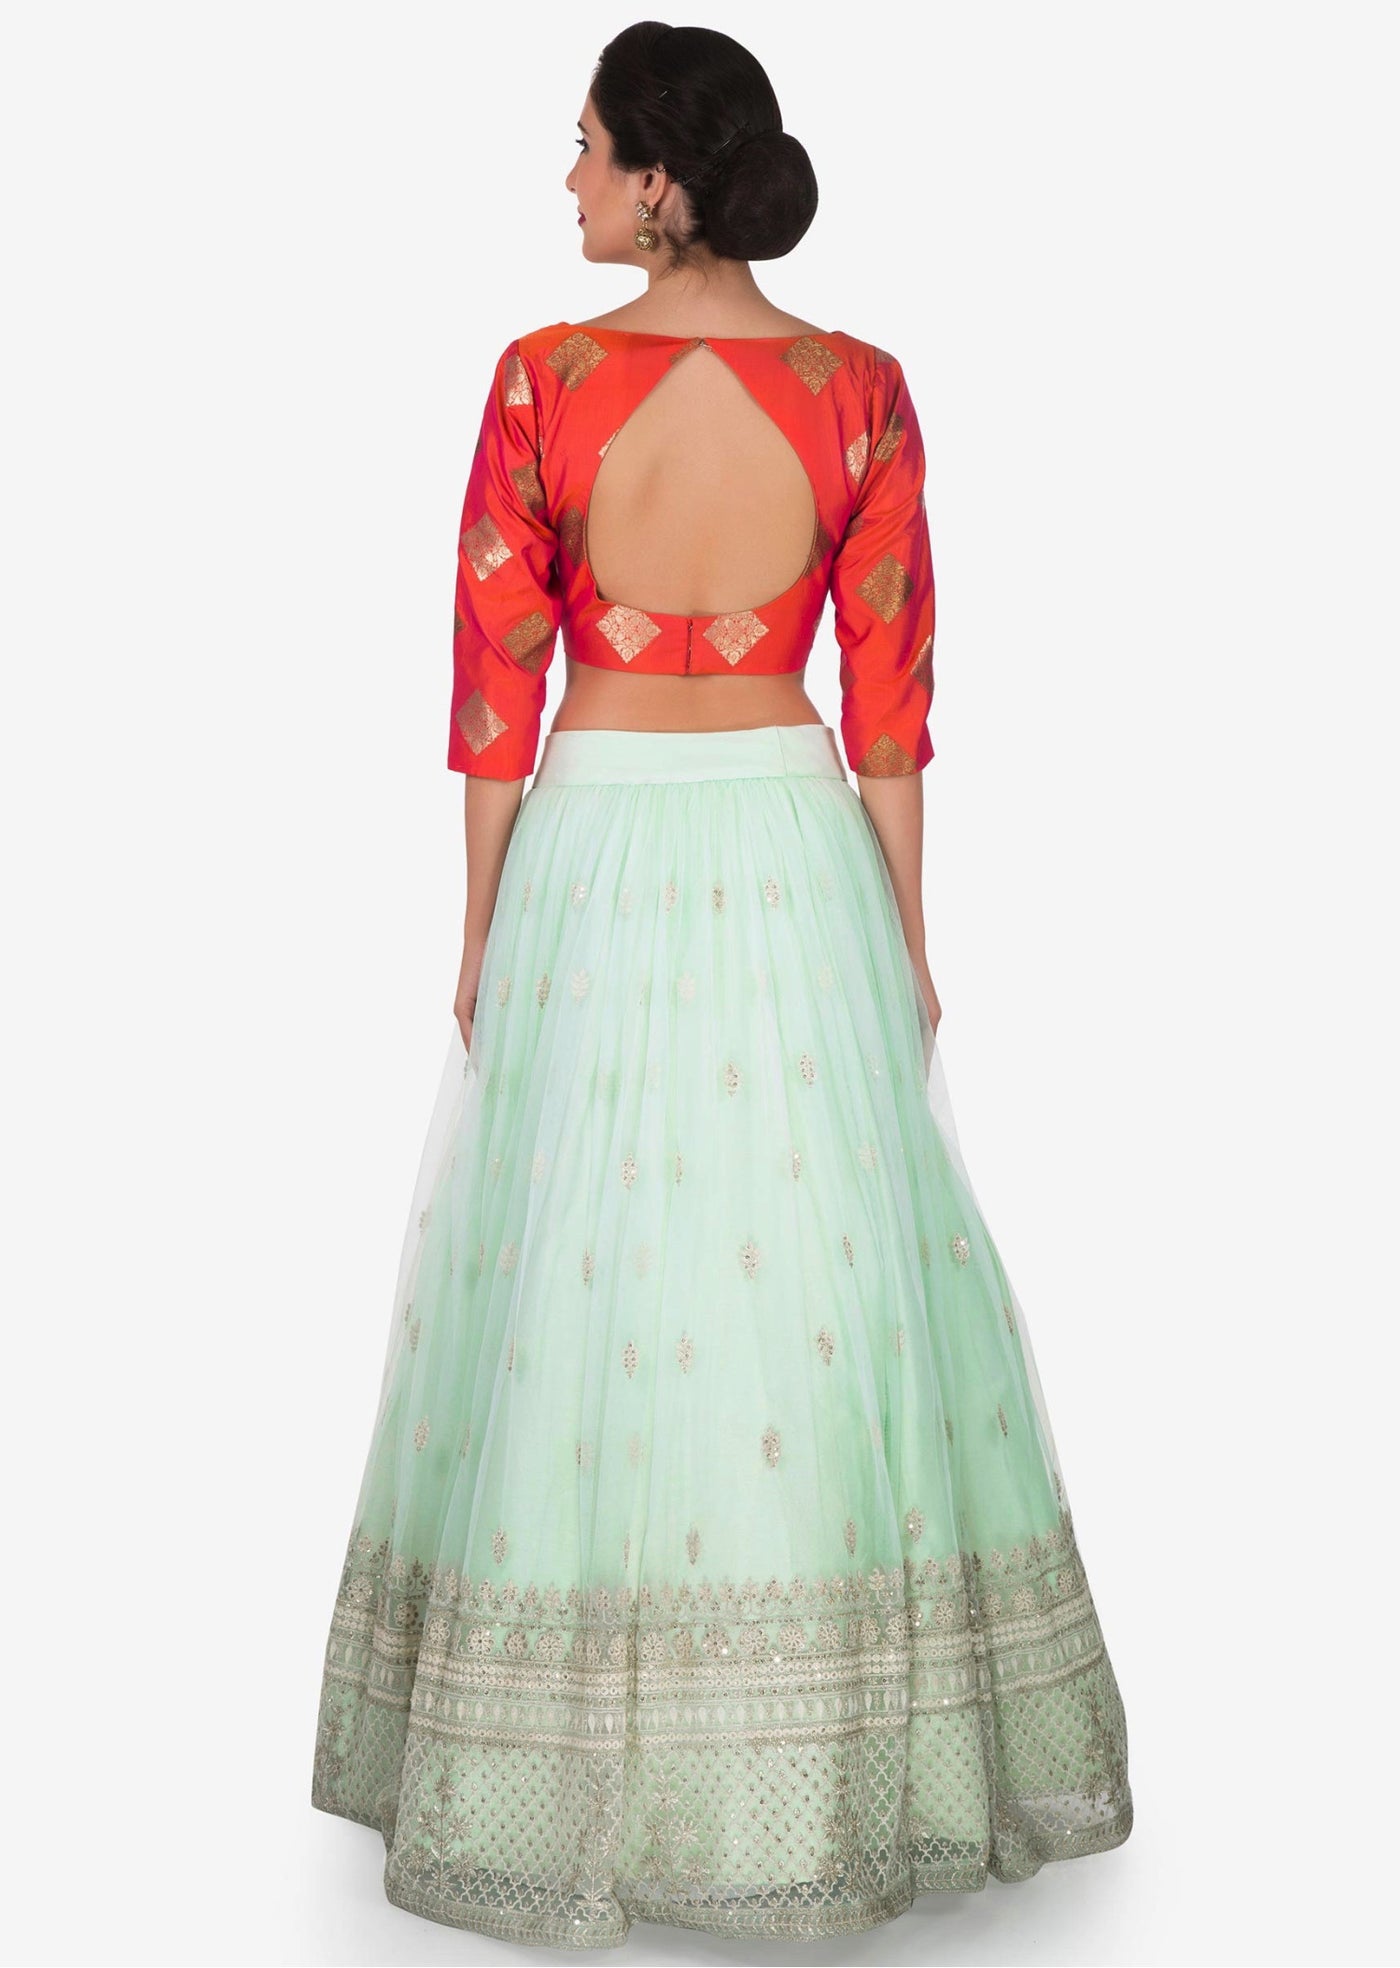 Mint blue lehenga with a orange brocade silk blouse embellished in thread work - Indian Clothing in Denver, CO, Aurora, CO, Boulder, CO, Fort Collins, CO, Colorado Springs, CO, Parker, CO, Highlands Ranch, CO, Cherry Creek, CO, Centennial, CO, and Longmont, CO. Nationwide shipping USA - India Fashion X